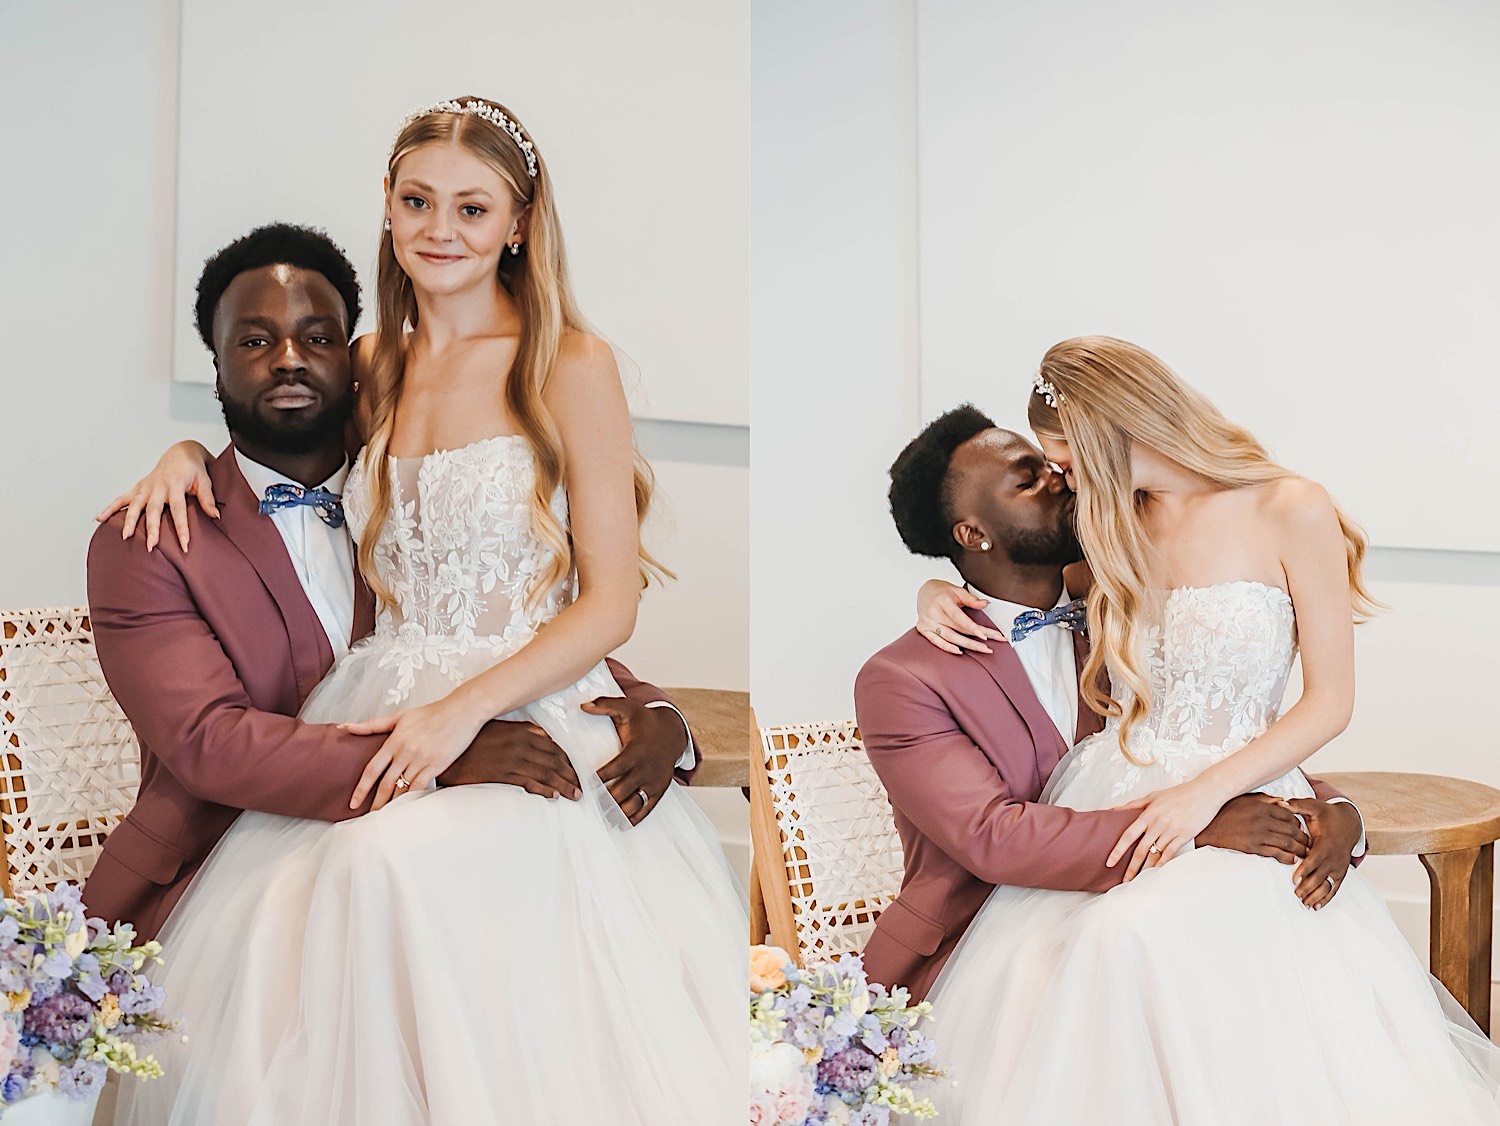 2 photos side by side of a bride and groom, in the left the groom is sitting on a chair while the bride sits on his lap and they both look at the camera, the right photo is of them in the same position but kissing one another